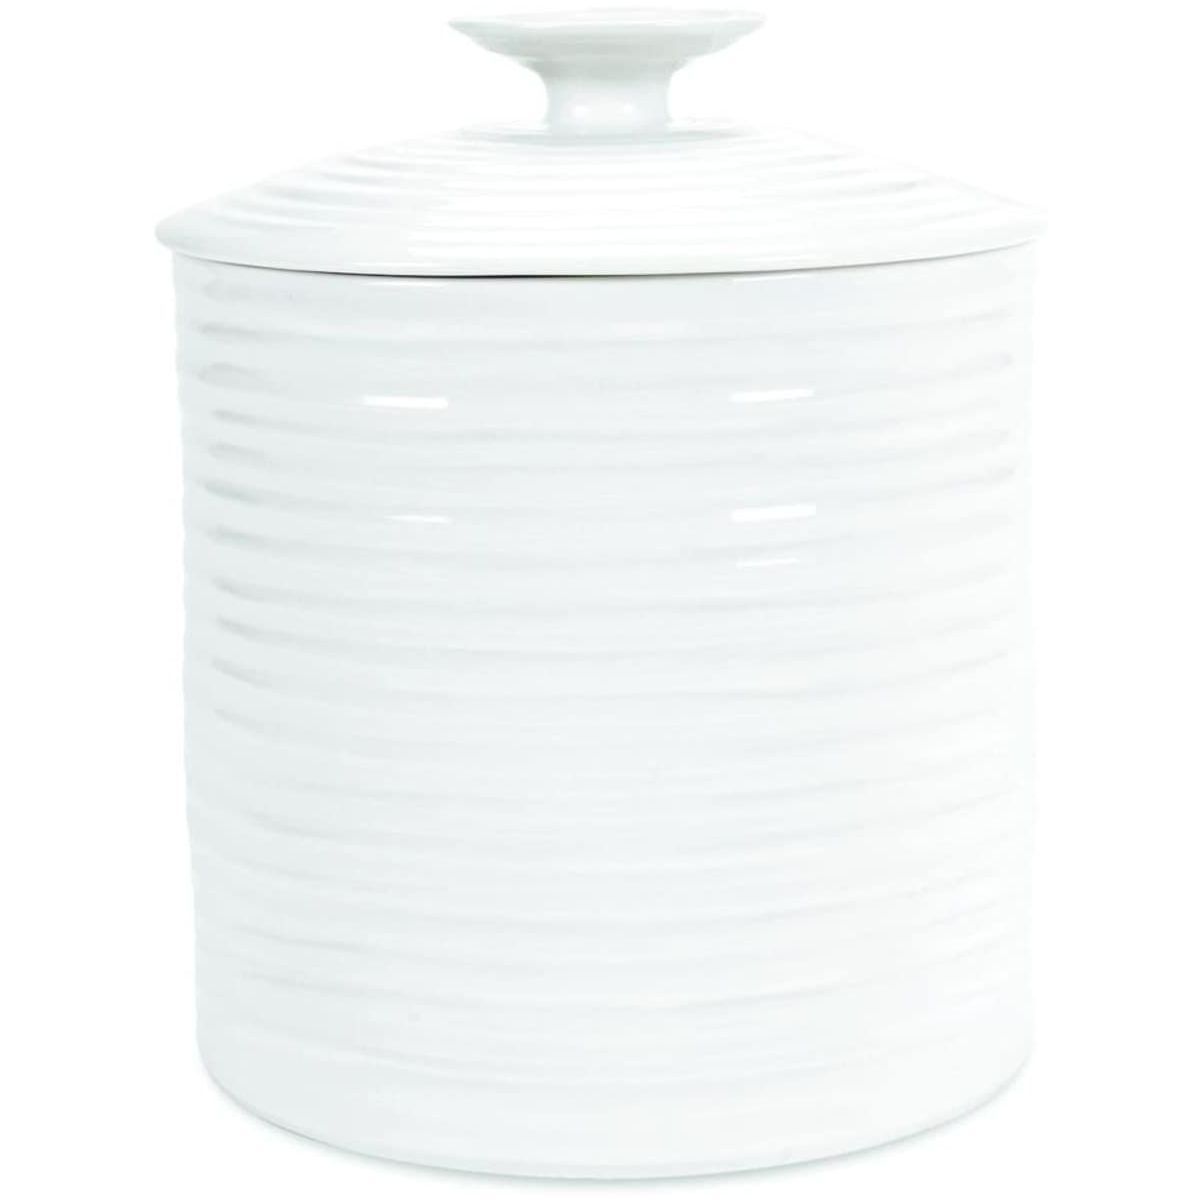 Portmeirion Sophie Conran White Large Canister, 6.25 inch / 80 oz | Target